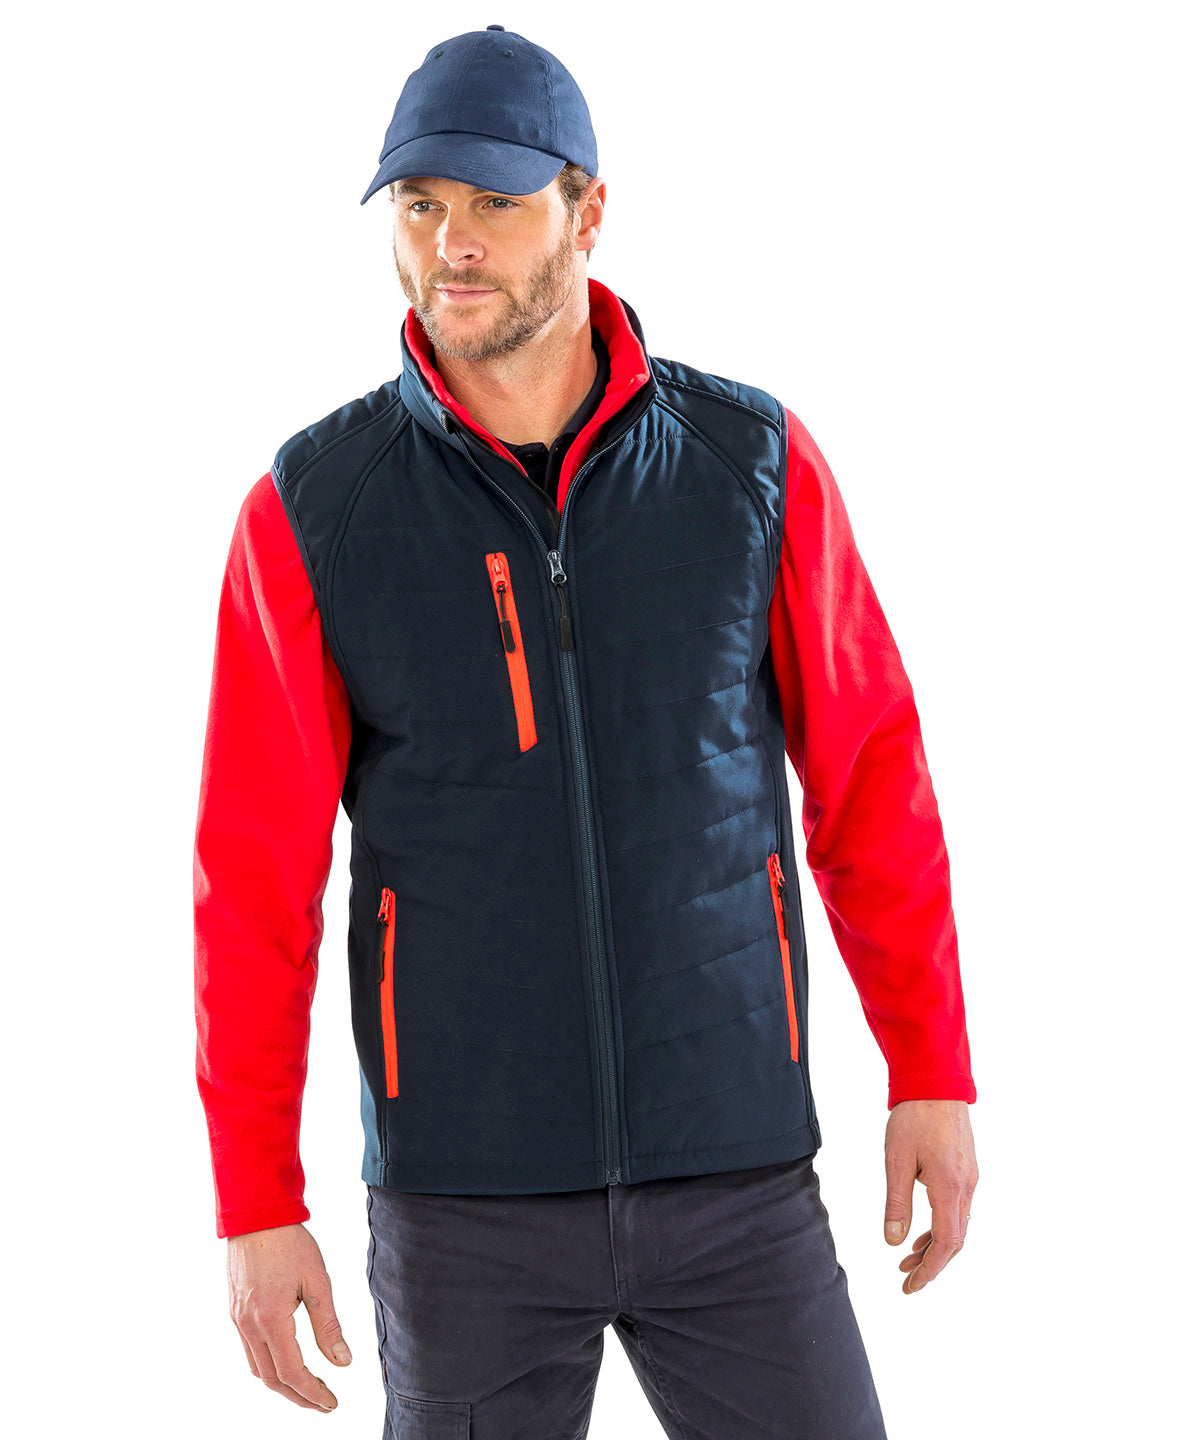 4x Embroidered Result Two-Tone Bodywarmer/Gilet with Company Logo